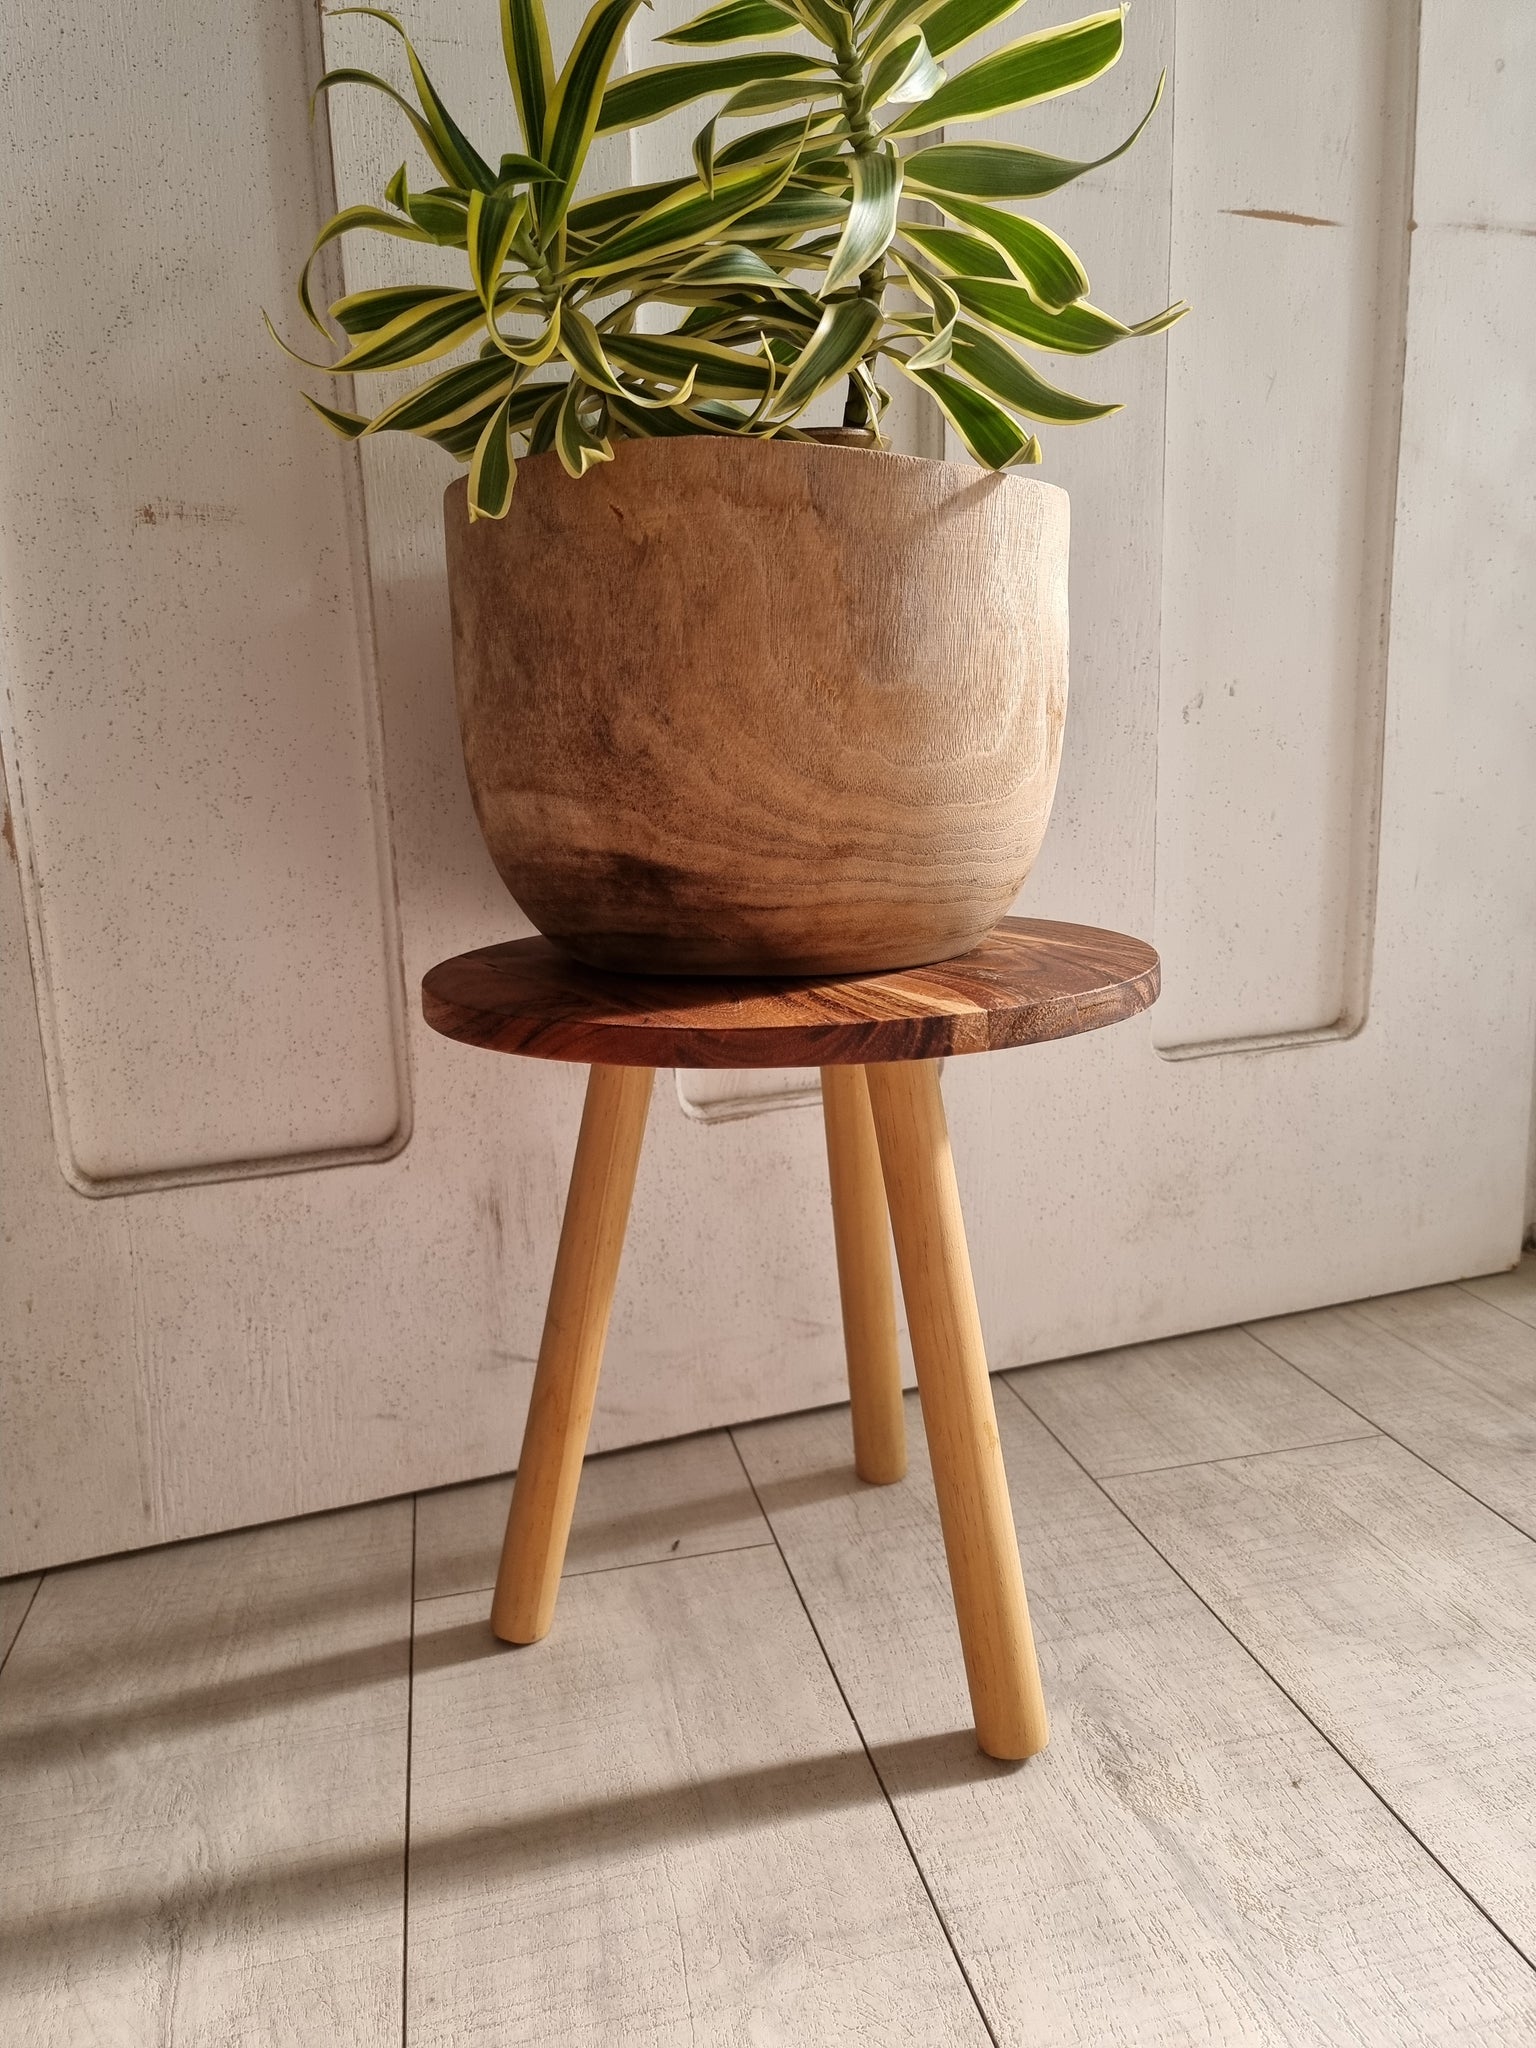 Wooden plant stand - picnic table